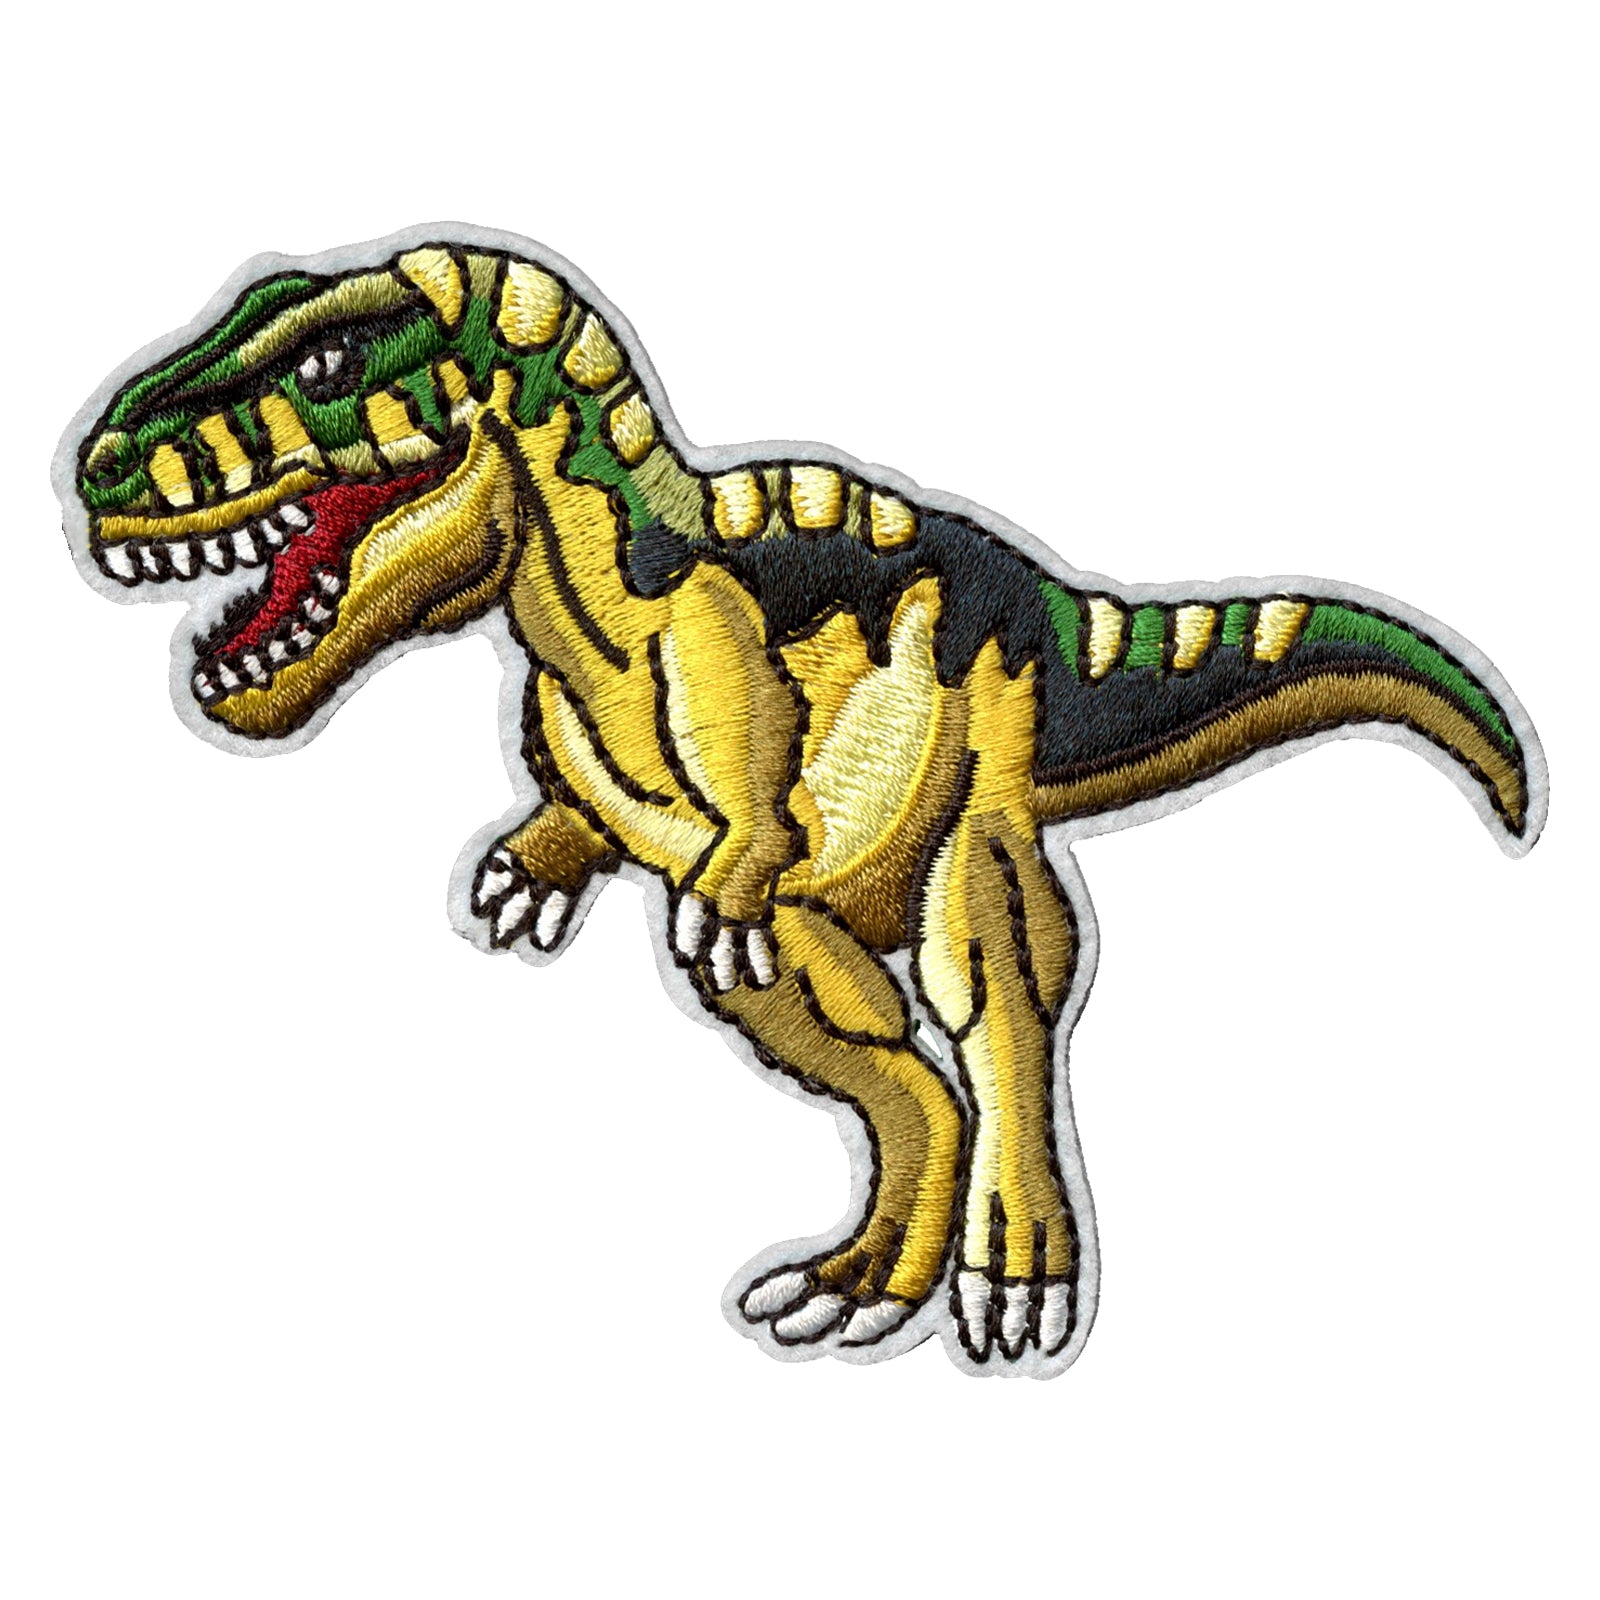 T-Rex Standing Green And Yellow Dinosaur Embroidered Iron On Patch 